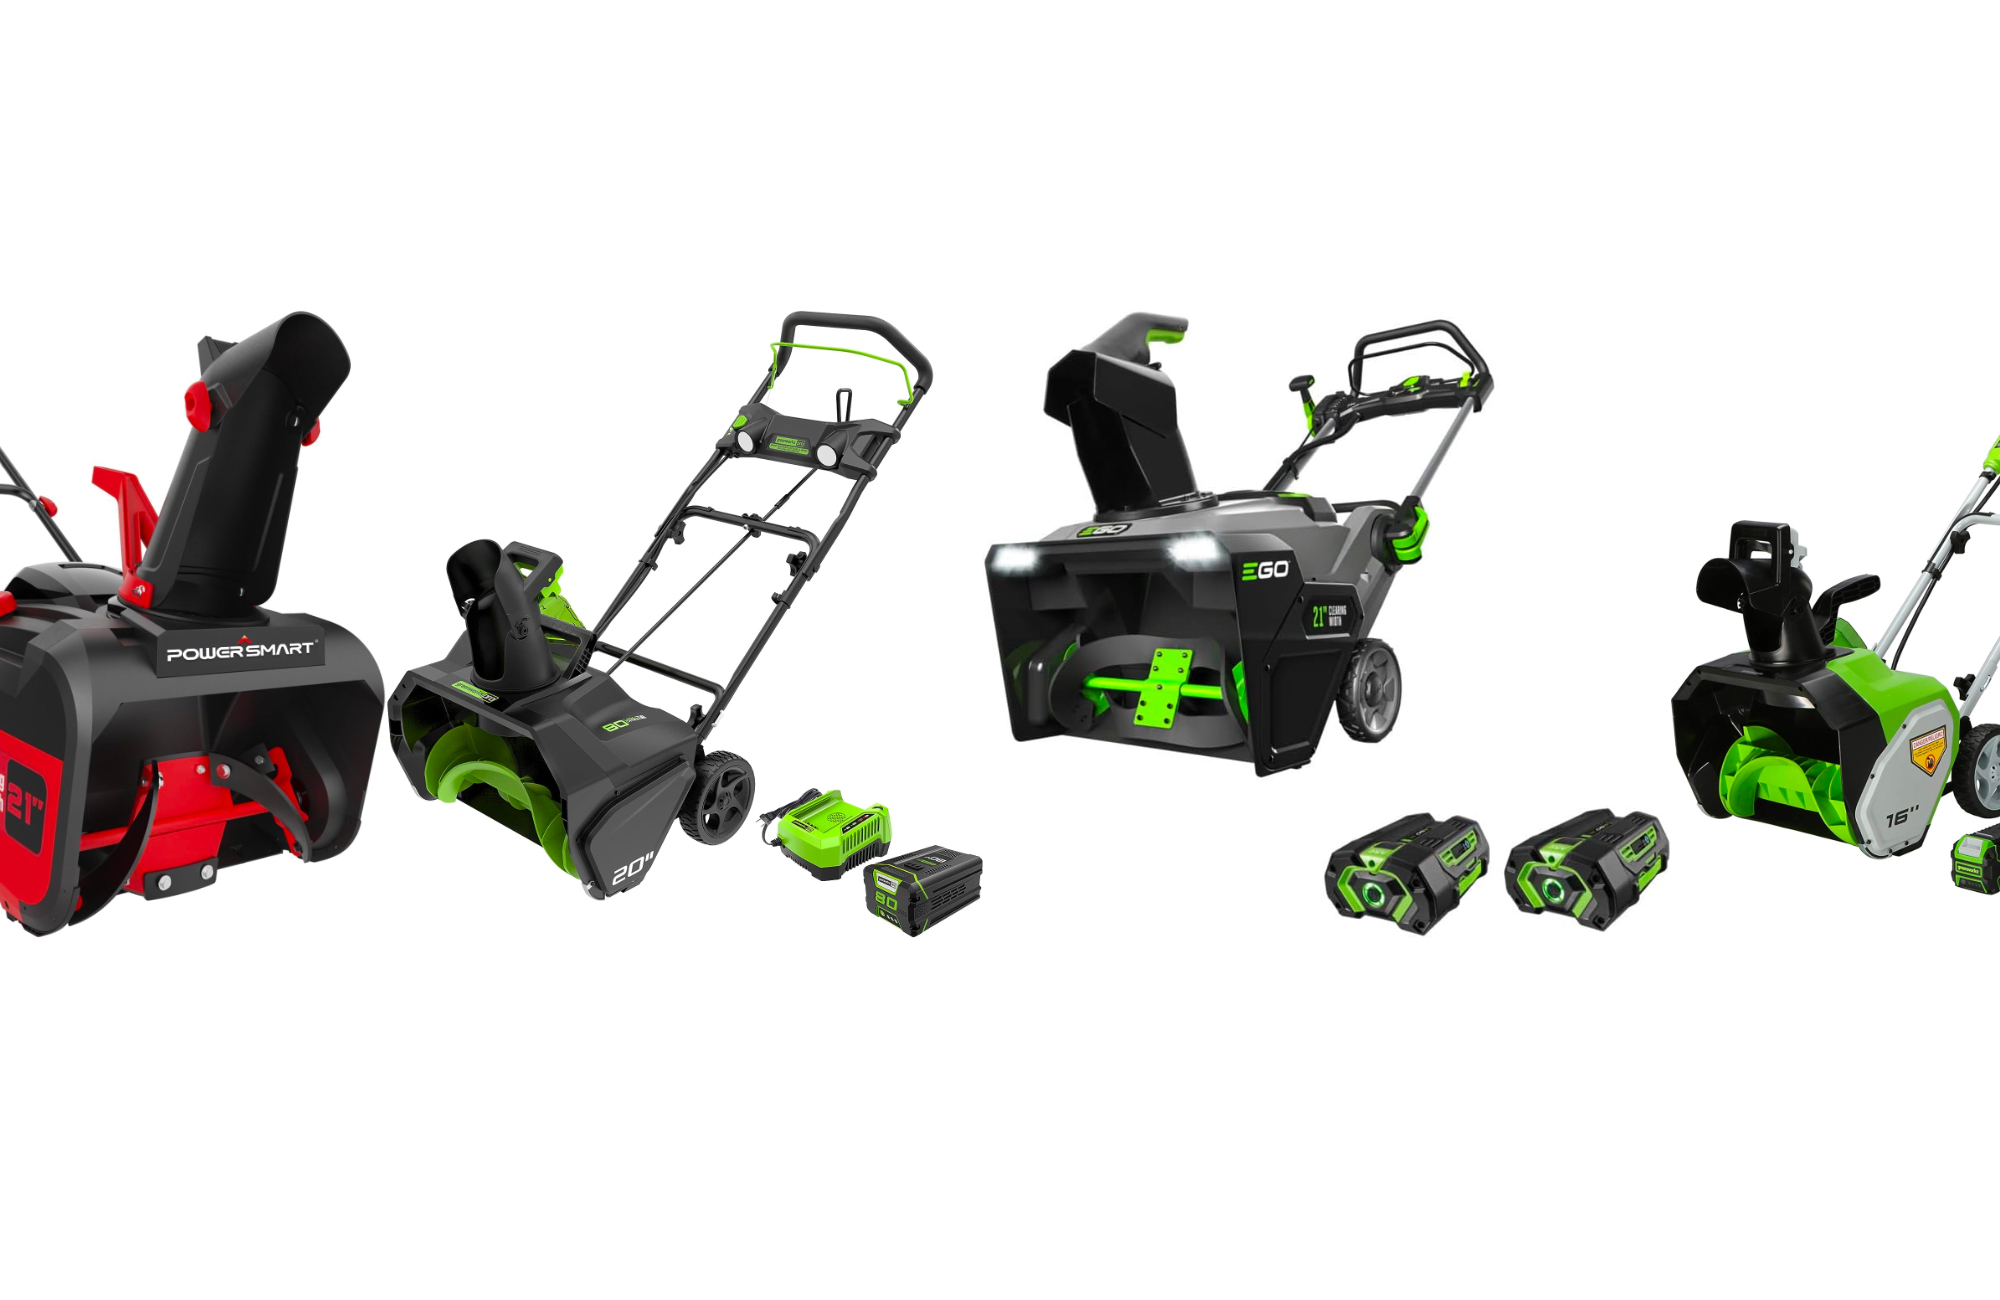 Greenworks 40V 20 Inch Cordless Snow Blower review